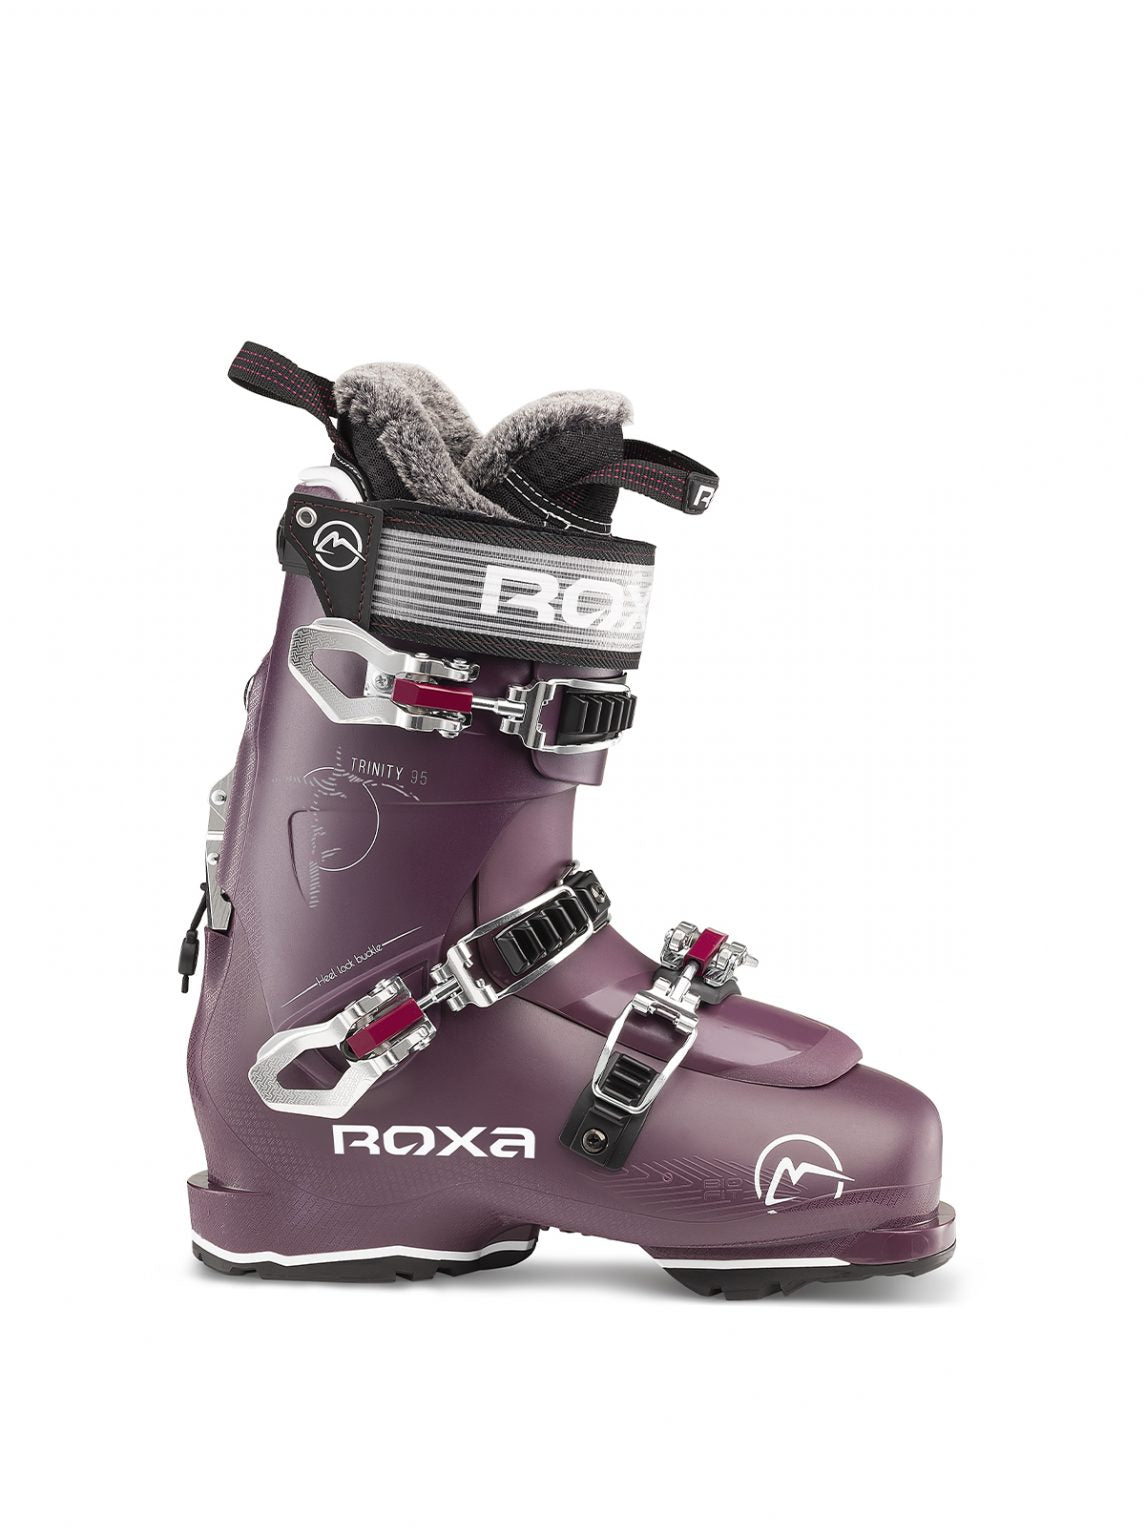 women's downhill ski boot in a deep purple with 4 buckles from Roxa